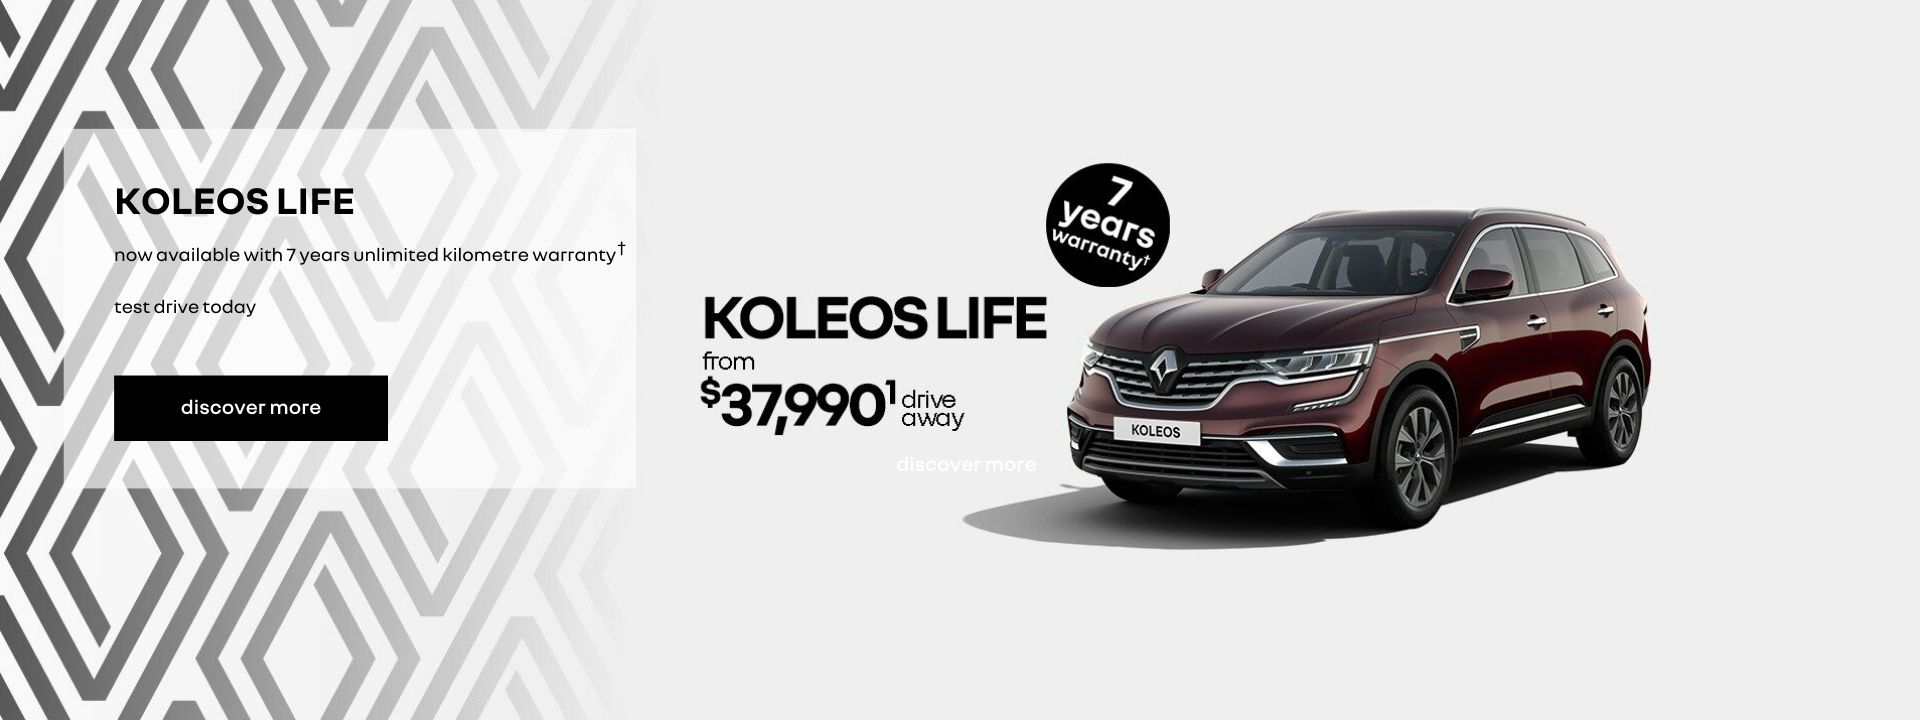 Koleos Life. Now available with 7 years unlimited kilometre warranty. Test drive today.